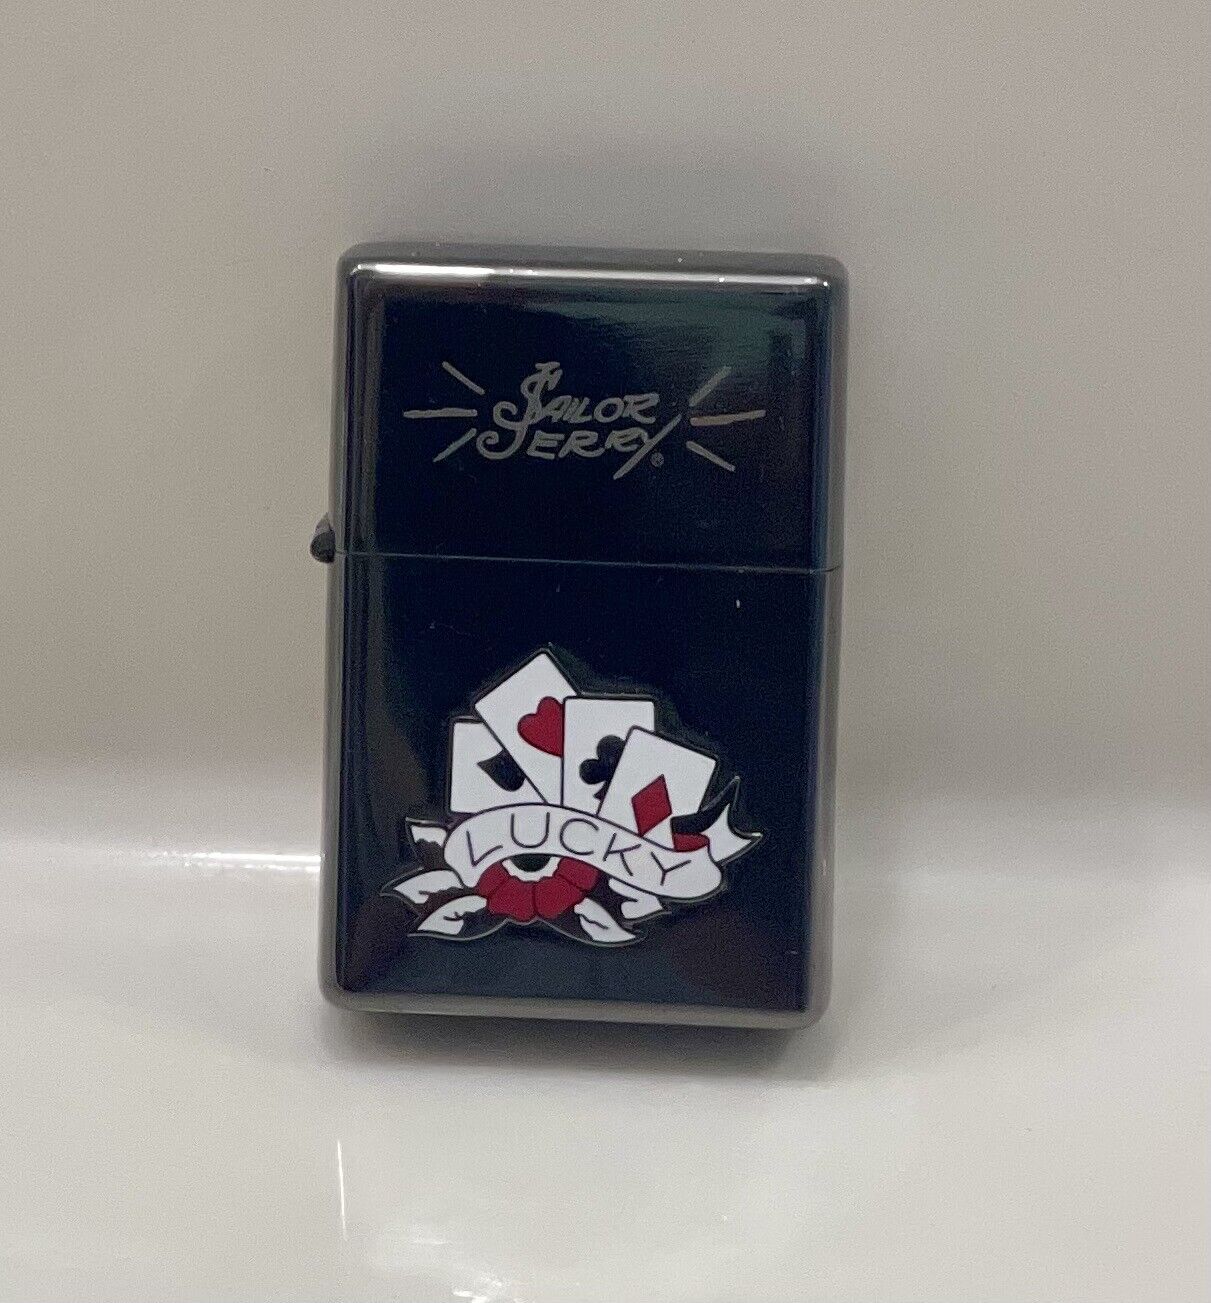 2007 Limited Ed. Sailor Jerry “Lucky” Midnight Chrome Refillable Lighter-New